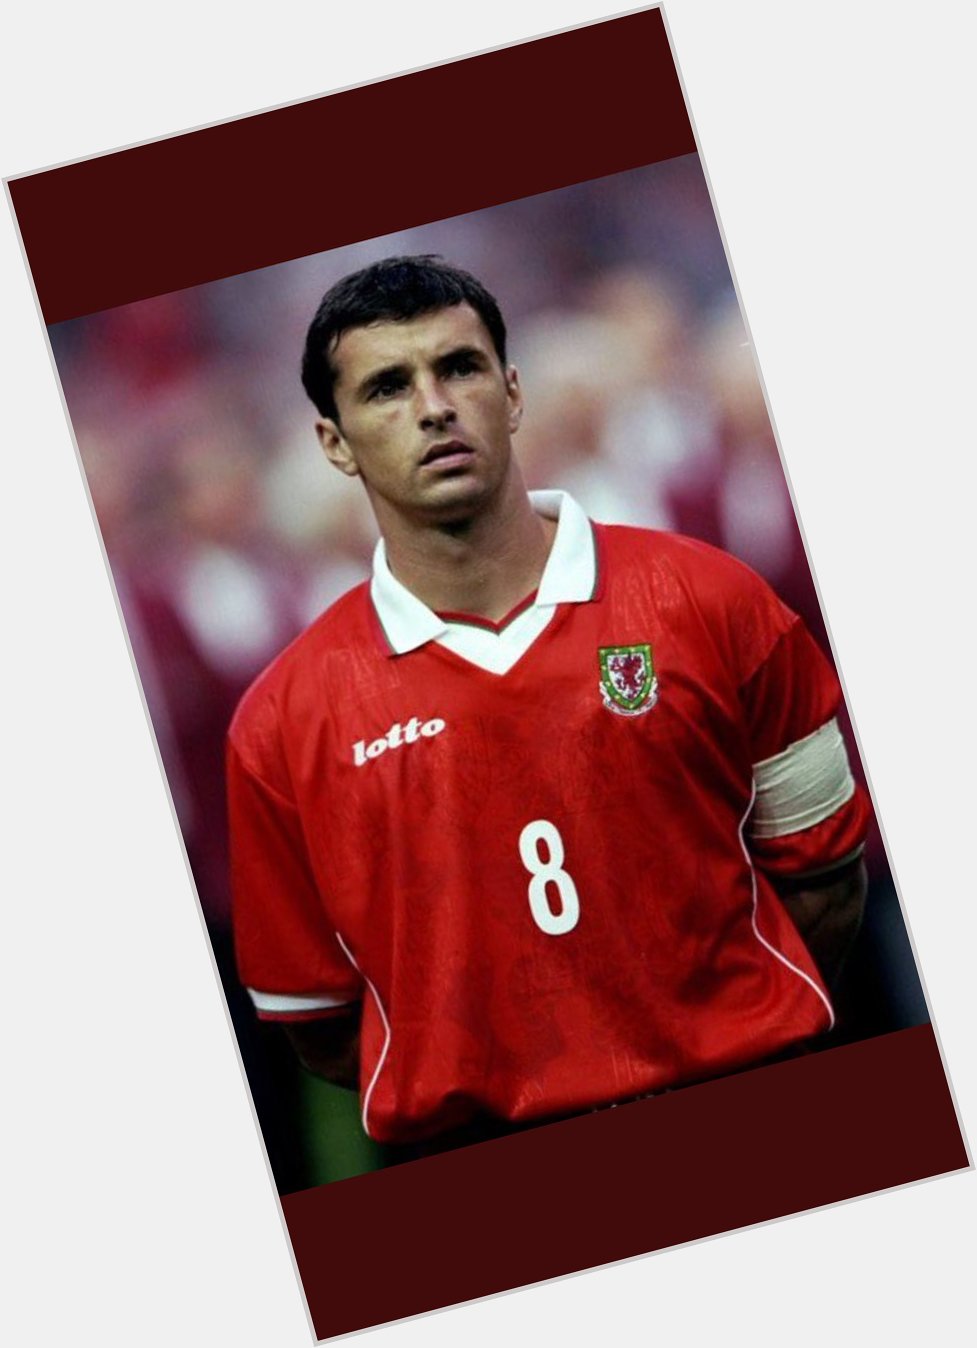 Happy birthday Gary speed, forever in our hearts  